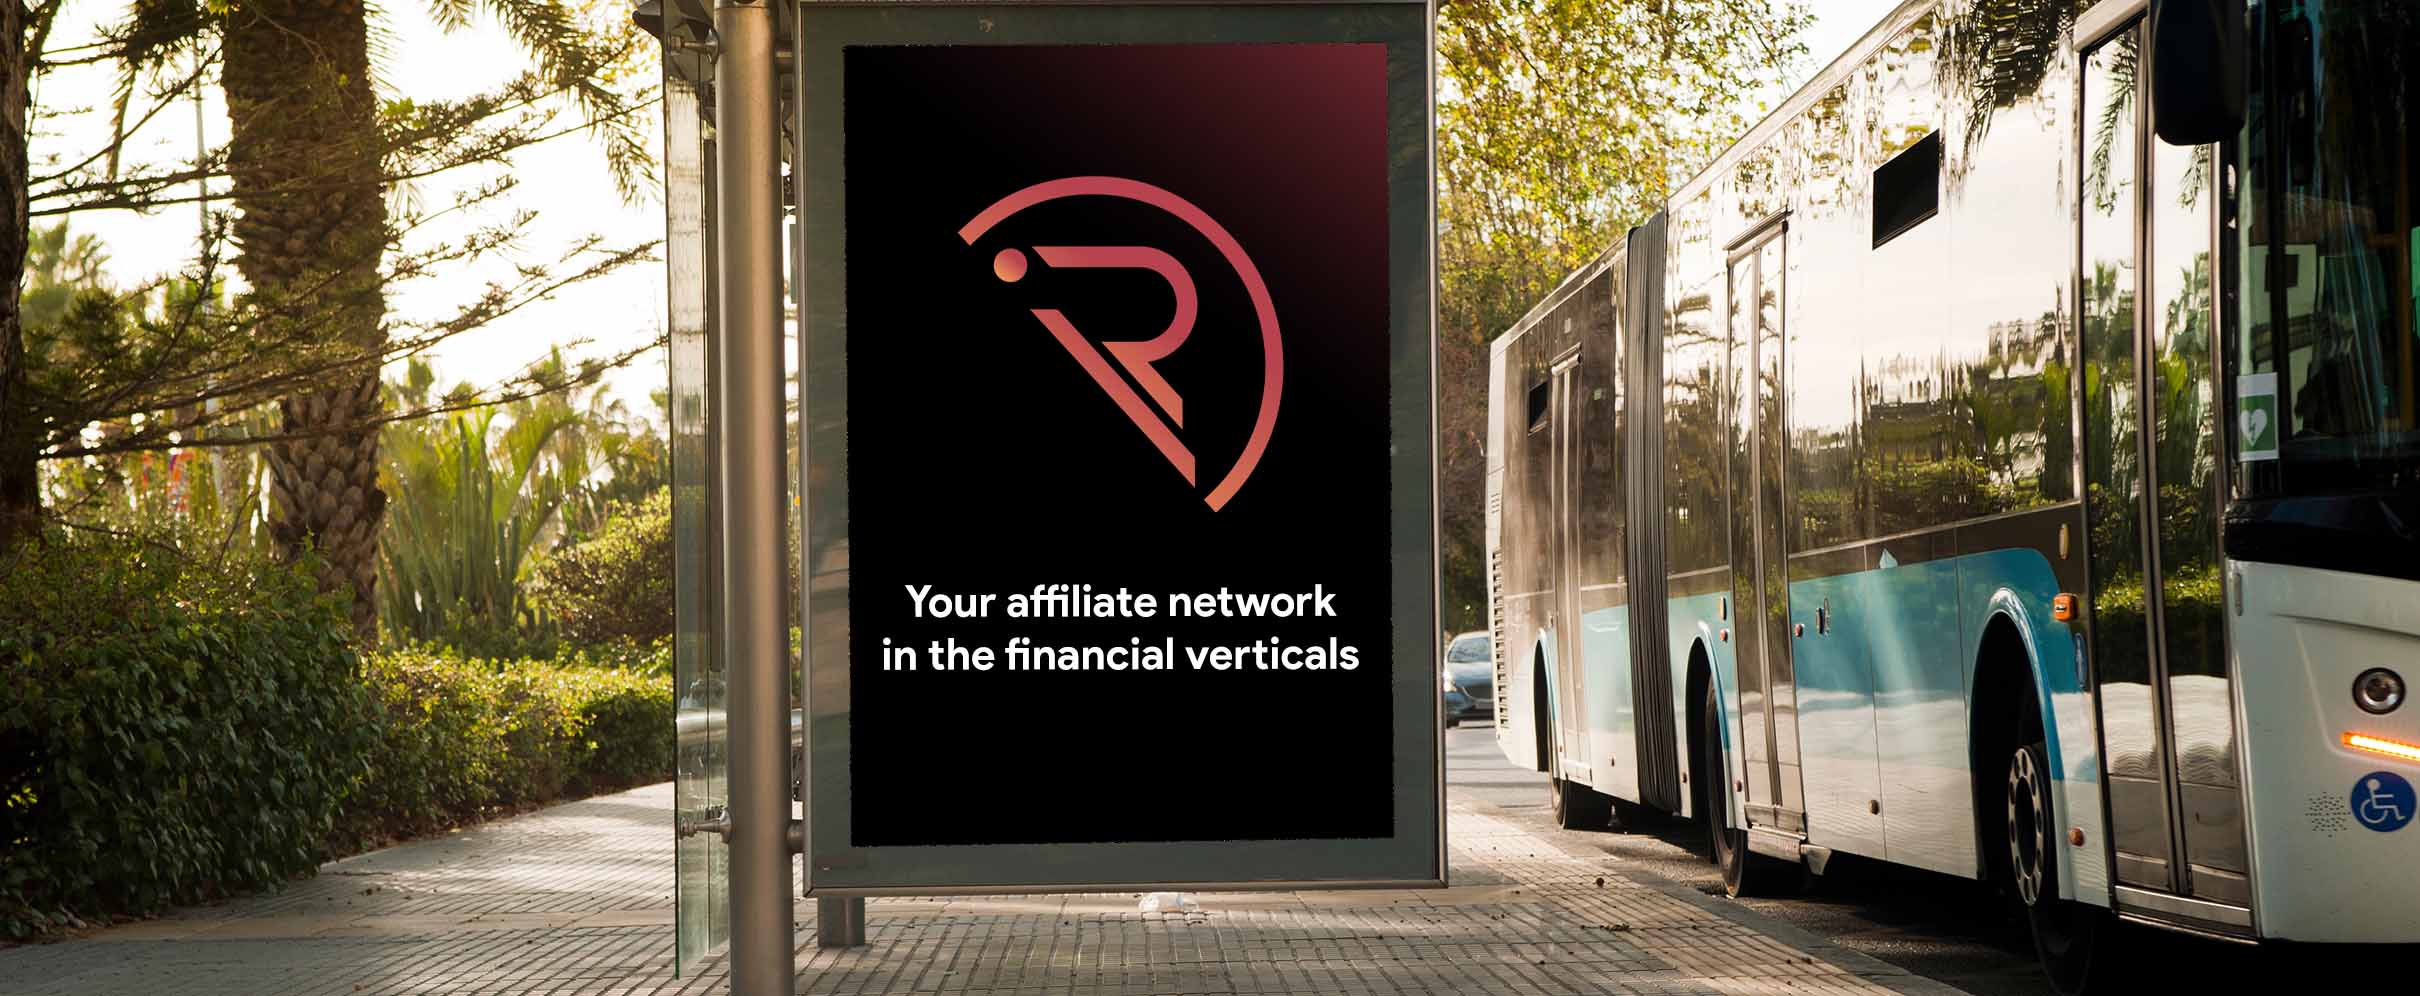 a bus stop that has a big sign that says 'Your affiliate network in the financial verticals'